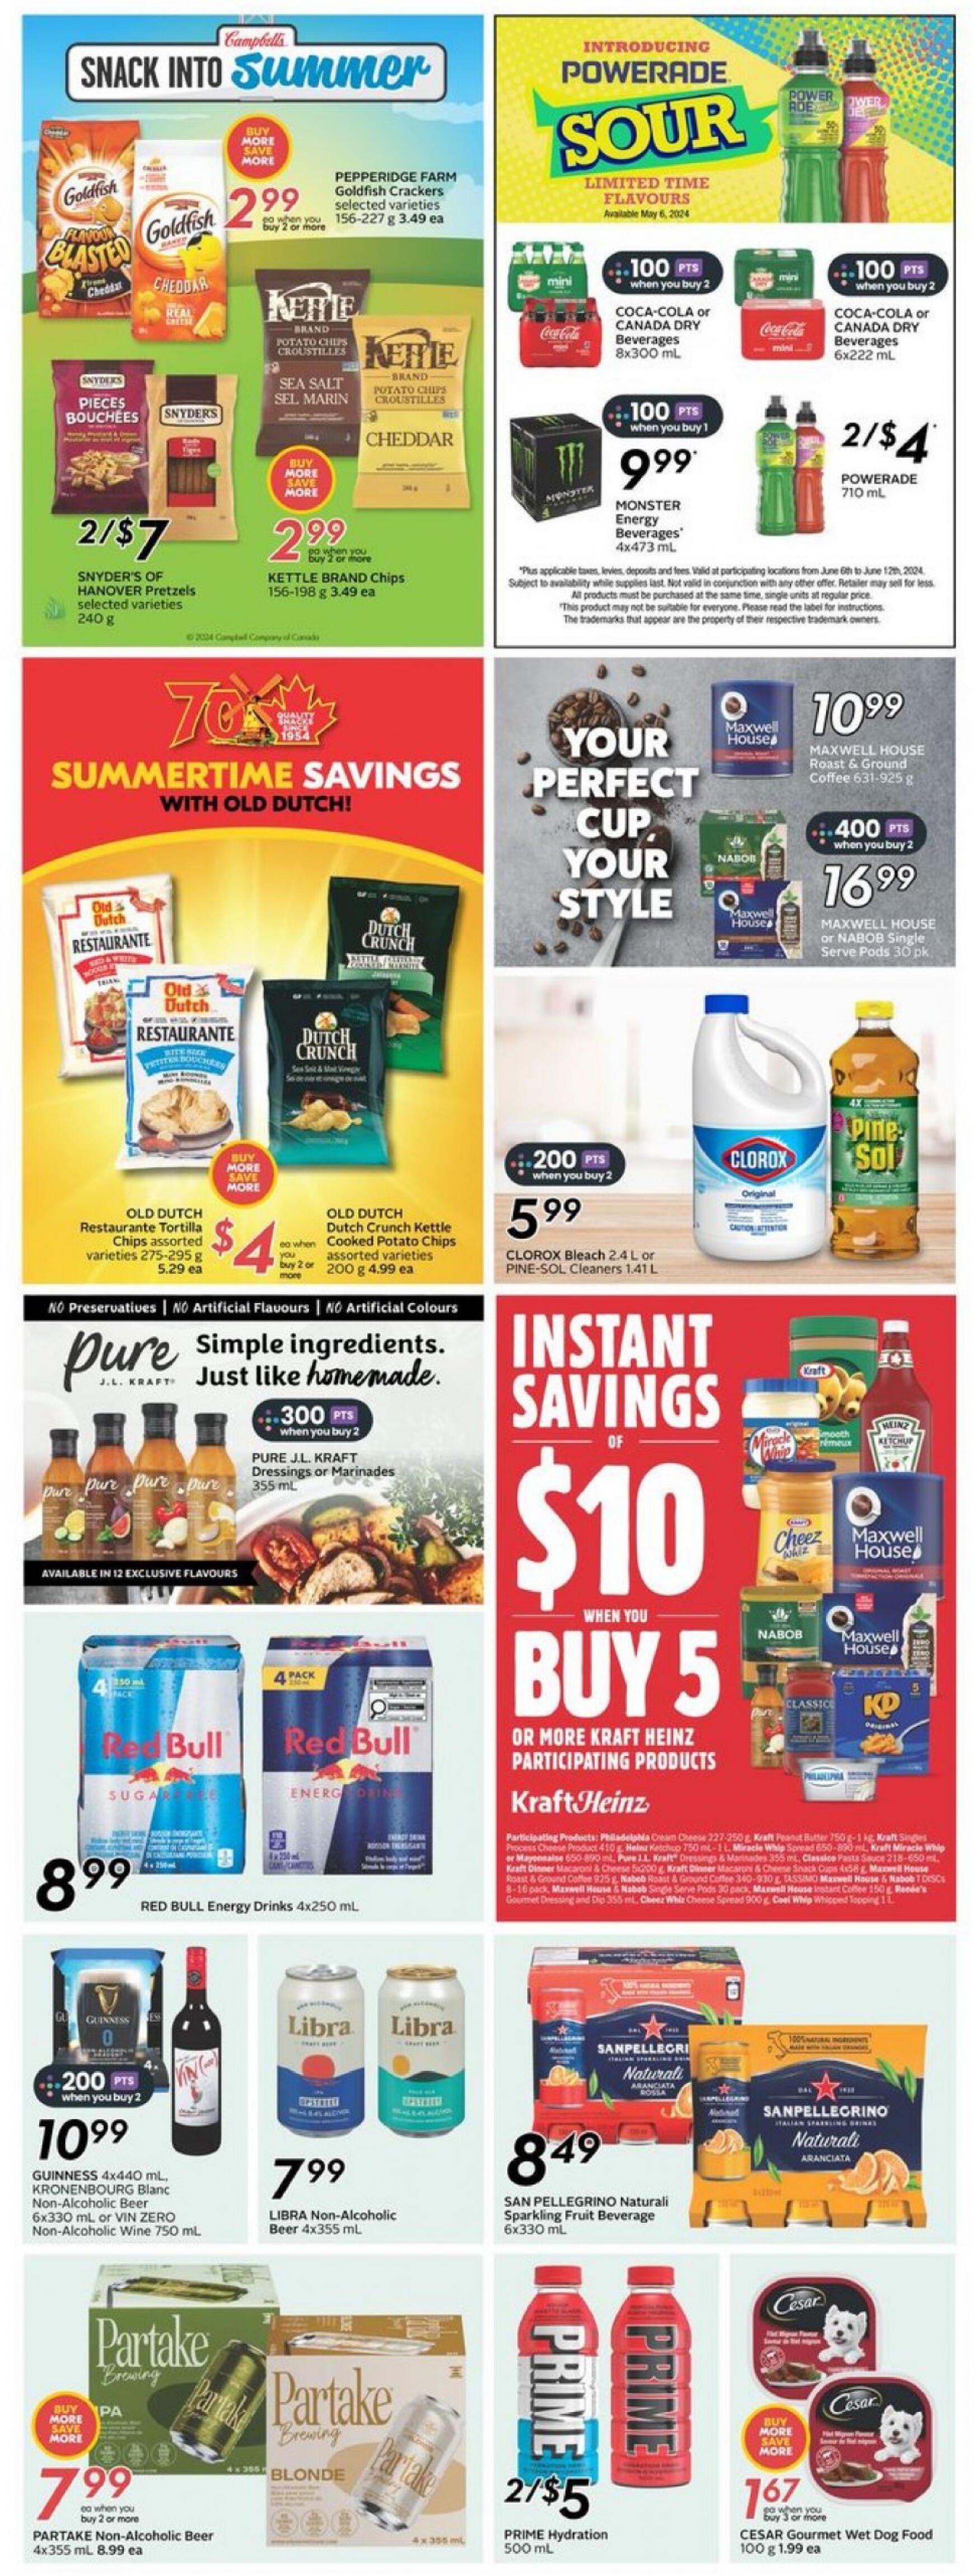 sobeys - Sobeys - Weekly Flyer - Ontario flyer current 06.06. - 12.06. - page: 20